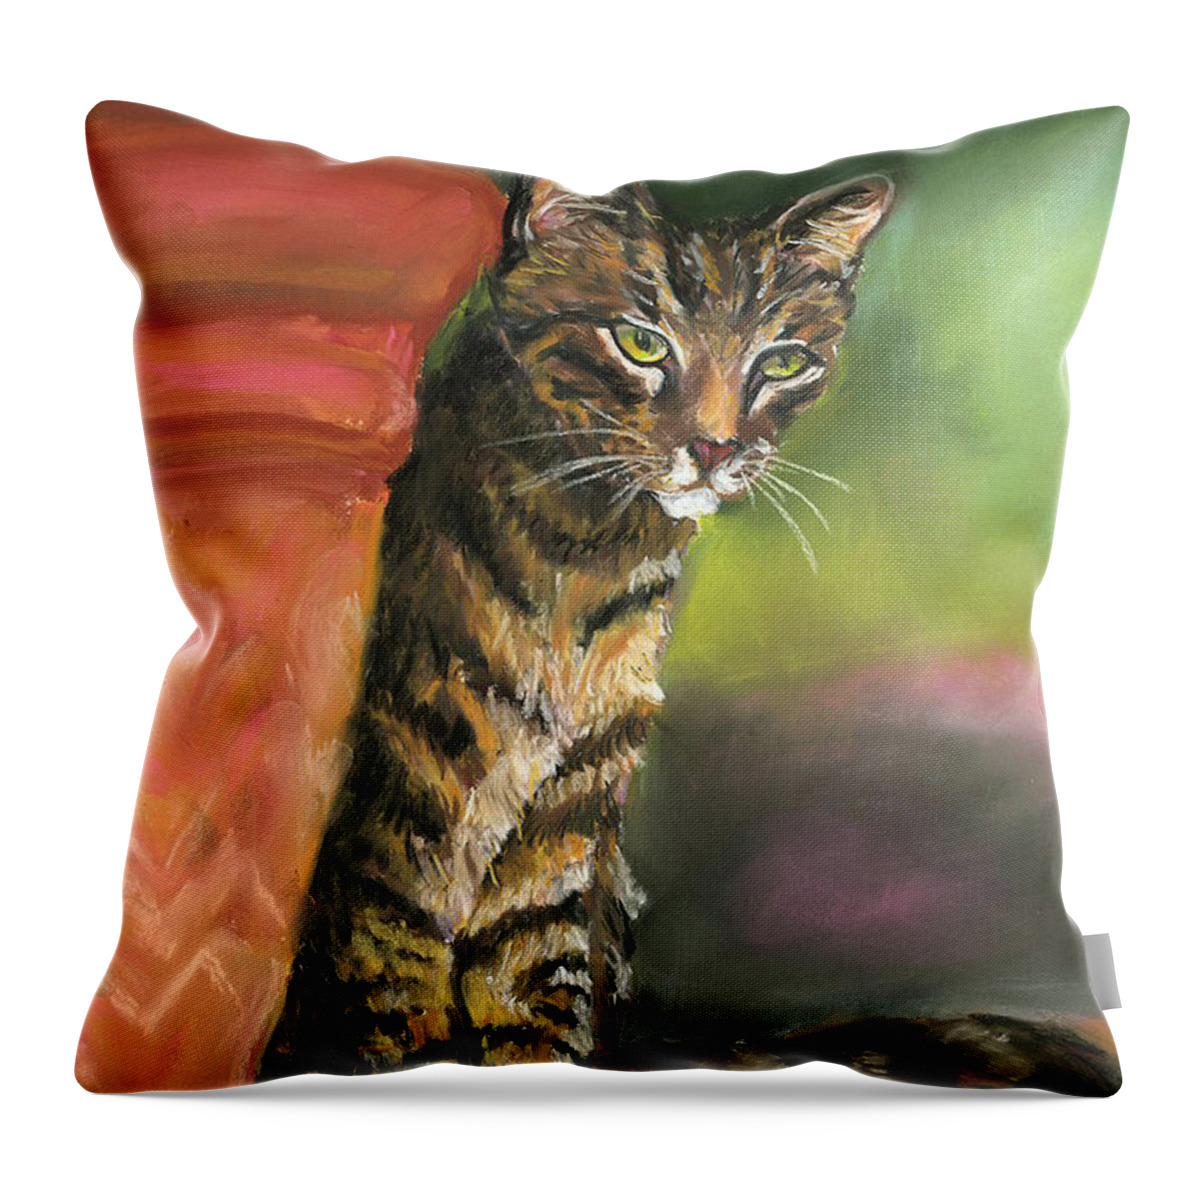  Throw Pillow featuring the painting Brown Tabby by Mary Jo Zorad